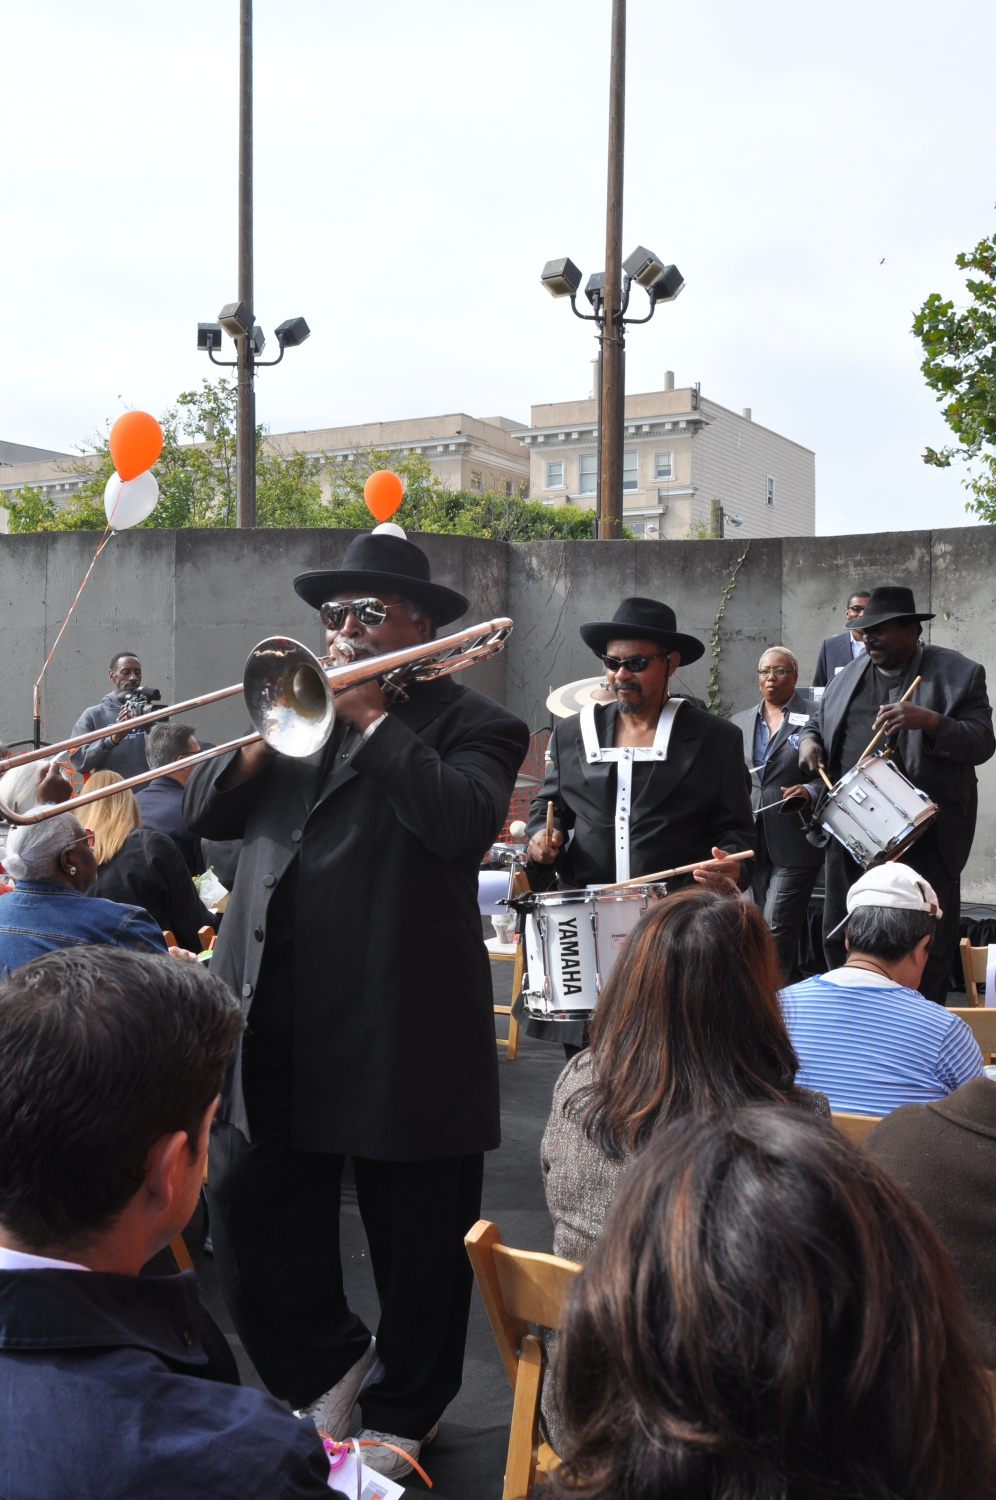 Band at the groundbreaking for Fillmore Park in San Francisco.